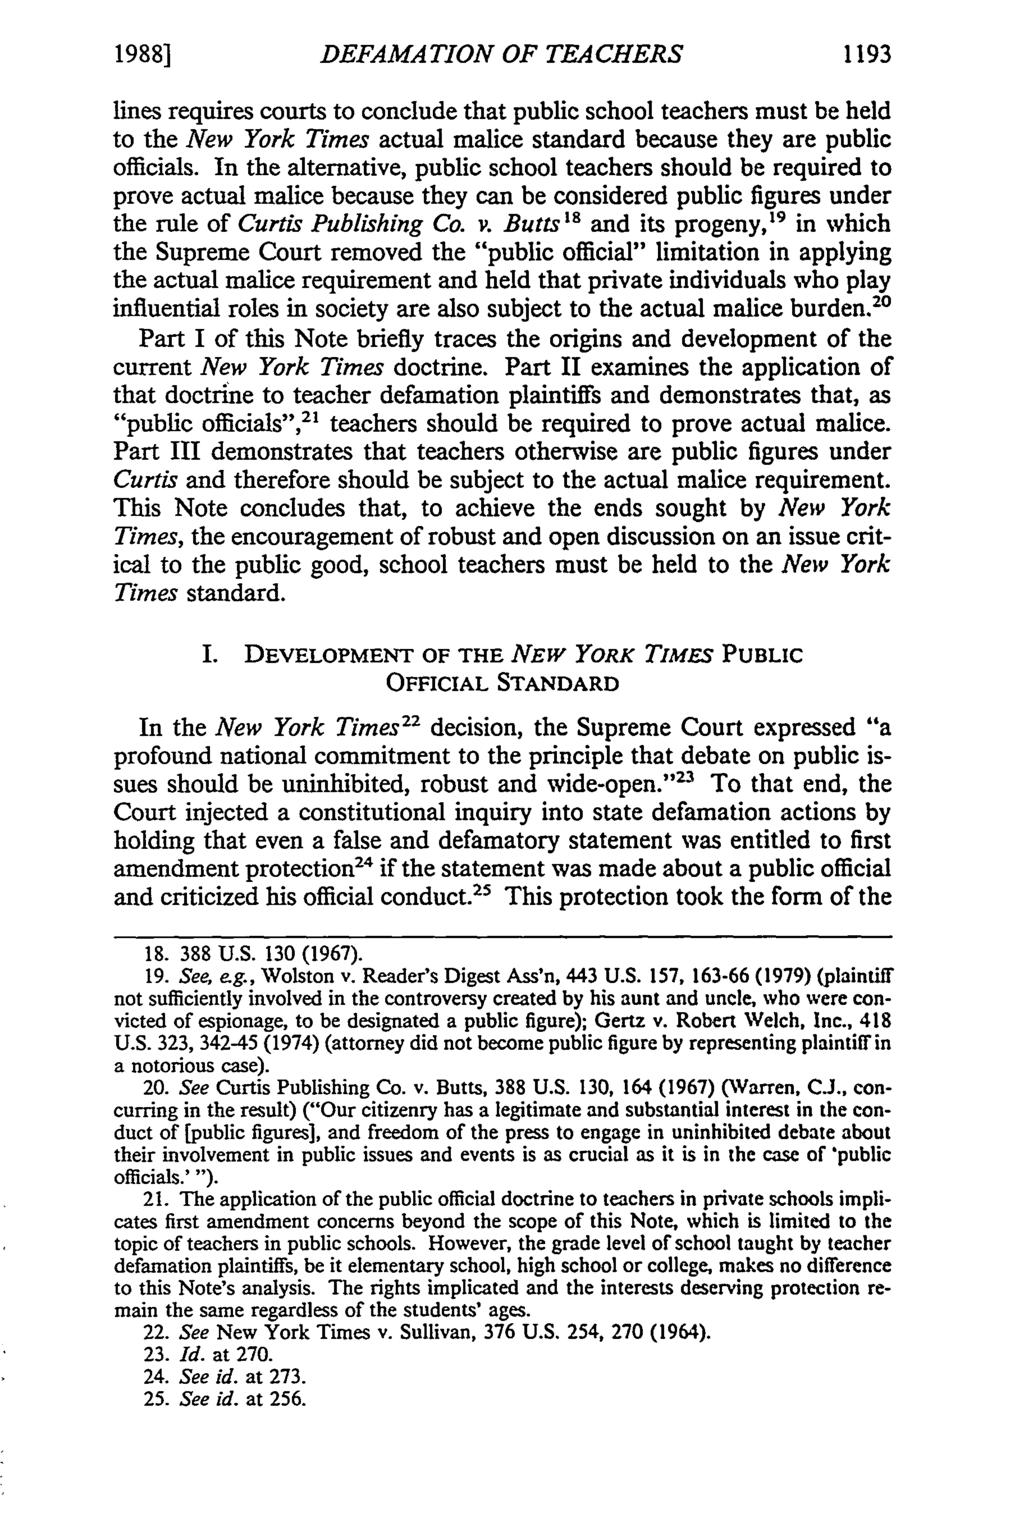 19881 DEFAMATION OF TEACHERS 1193 lines requires courts to conclude that public school teachers must be held to the New York Times actual malice standard because they are public officials.